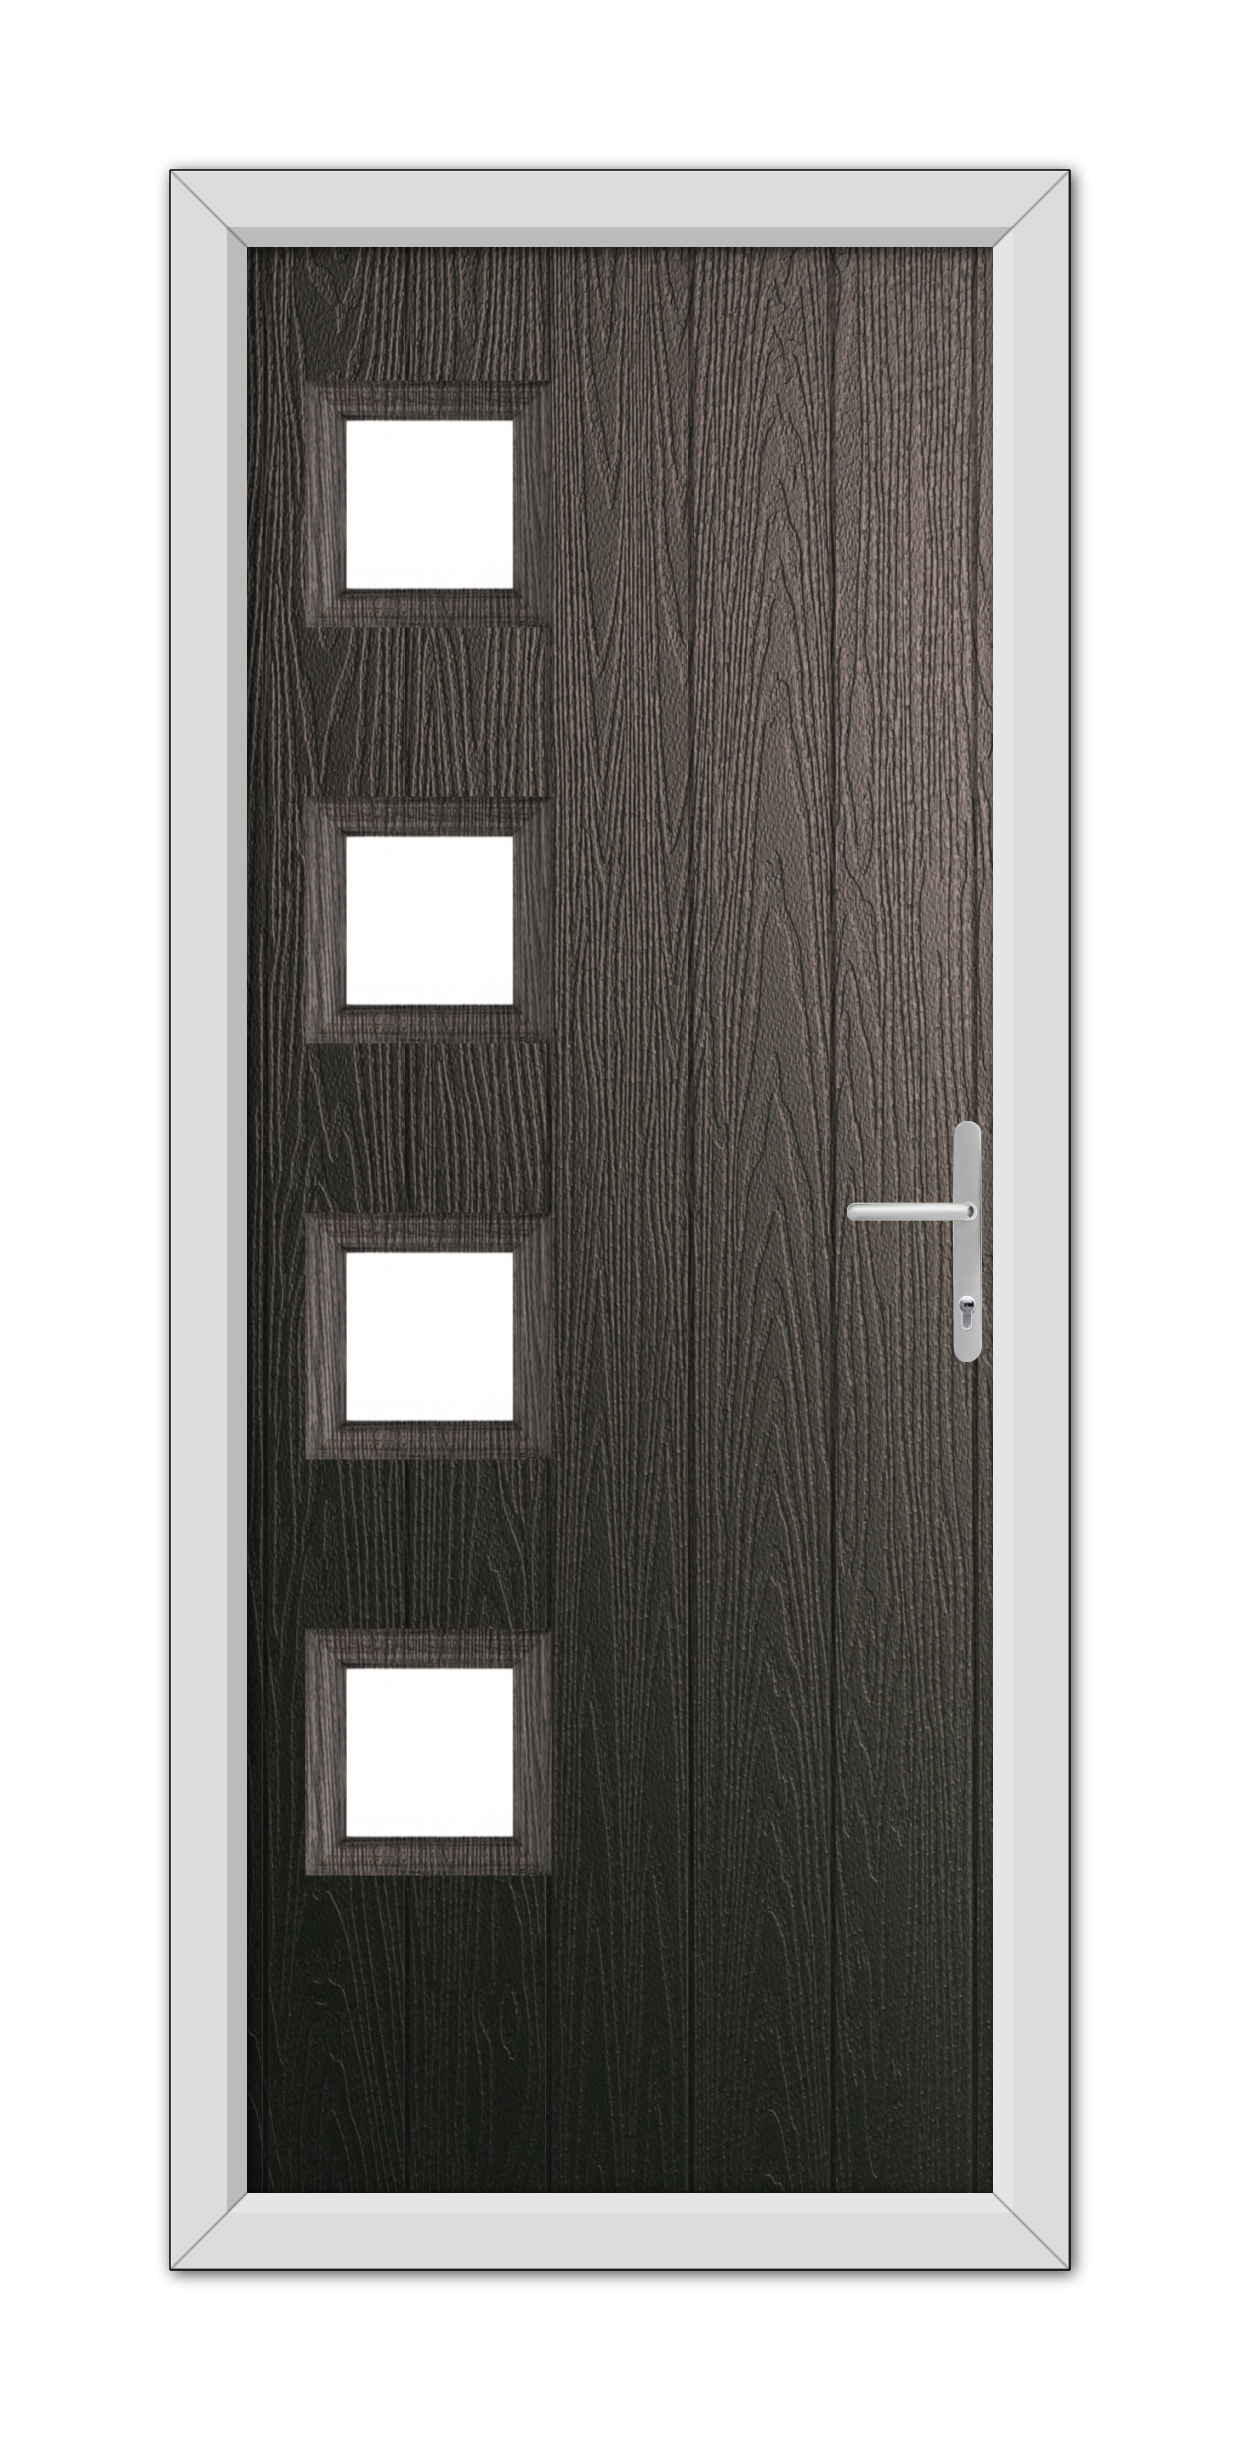 A Schwarzbraun Sussex Composite Door 48mm Timber Core with a silver frame, featuring four horizontal glass panels arranged in a vertical line.